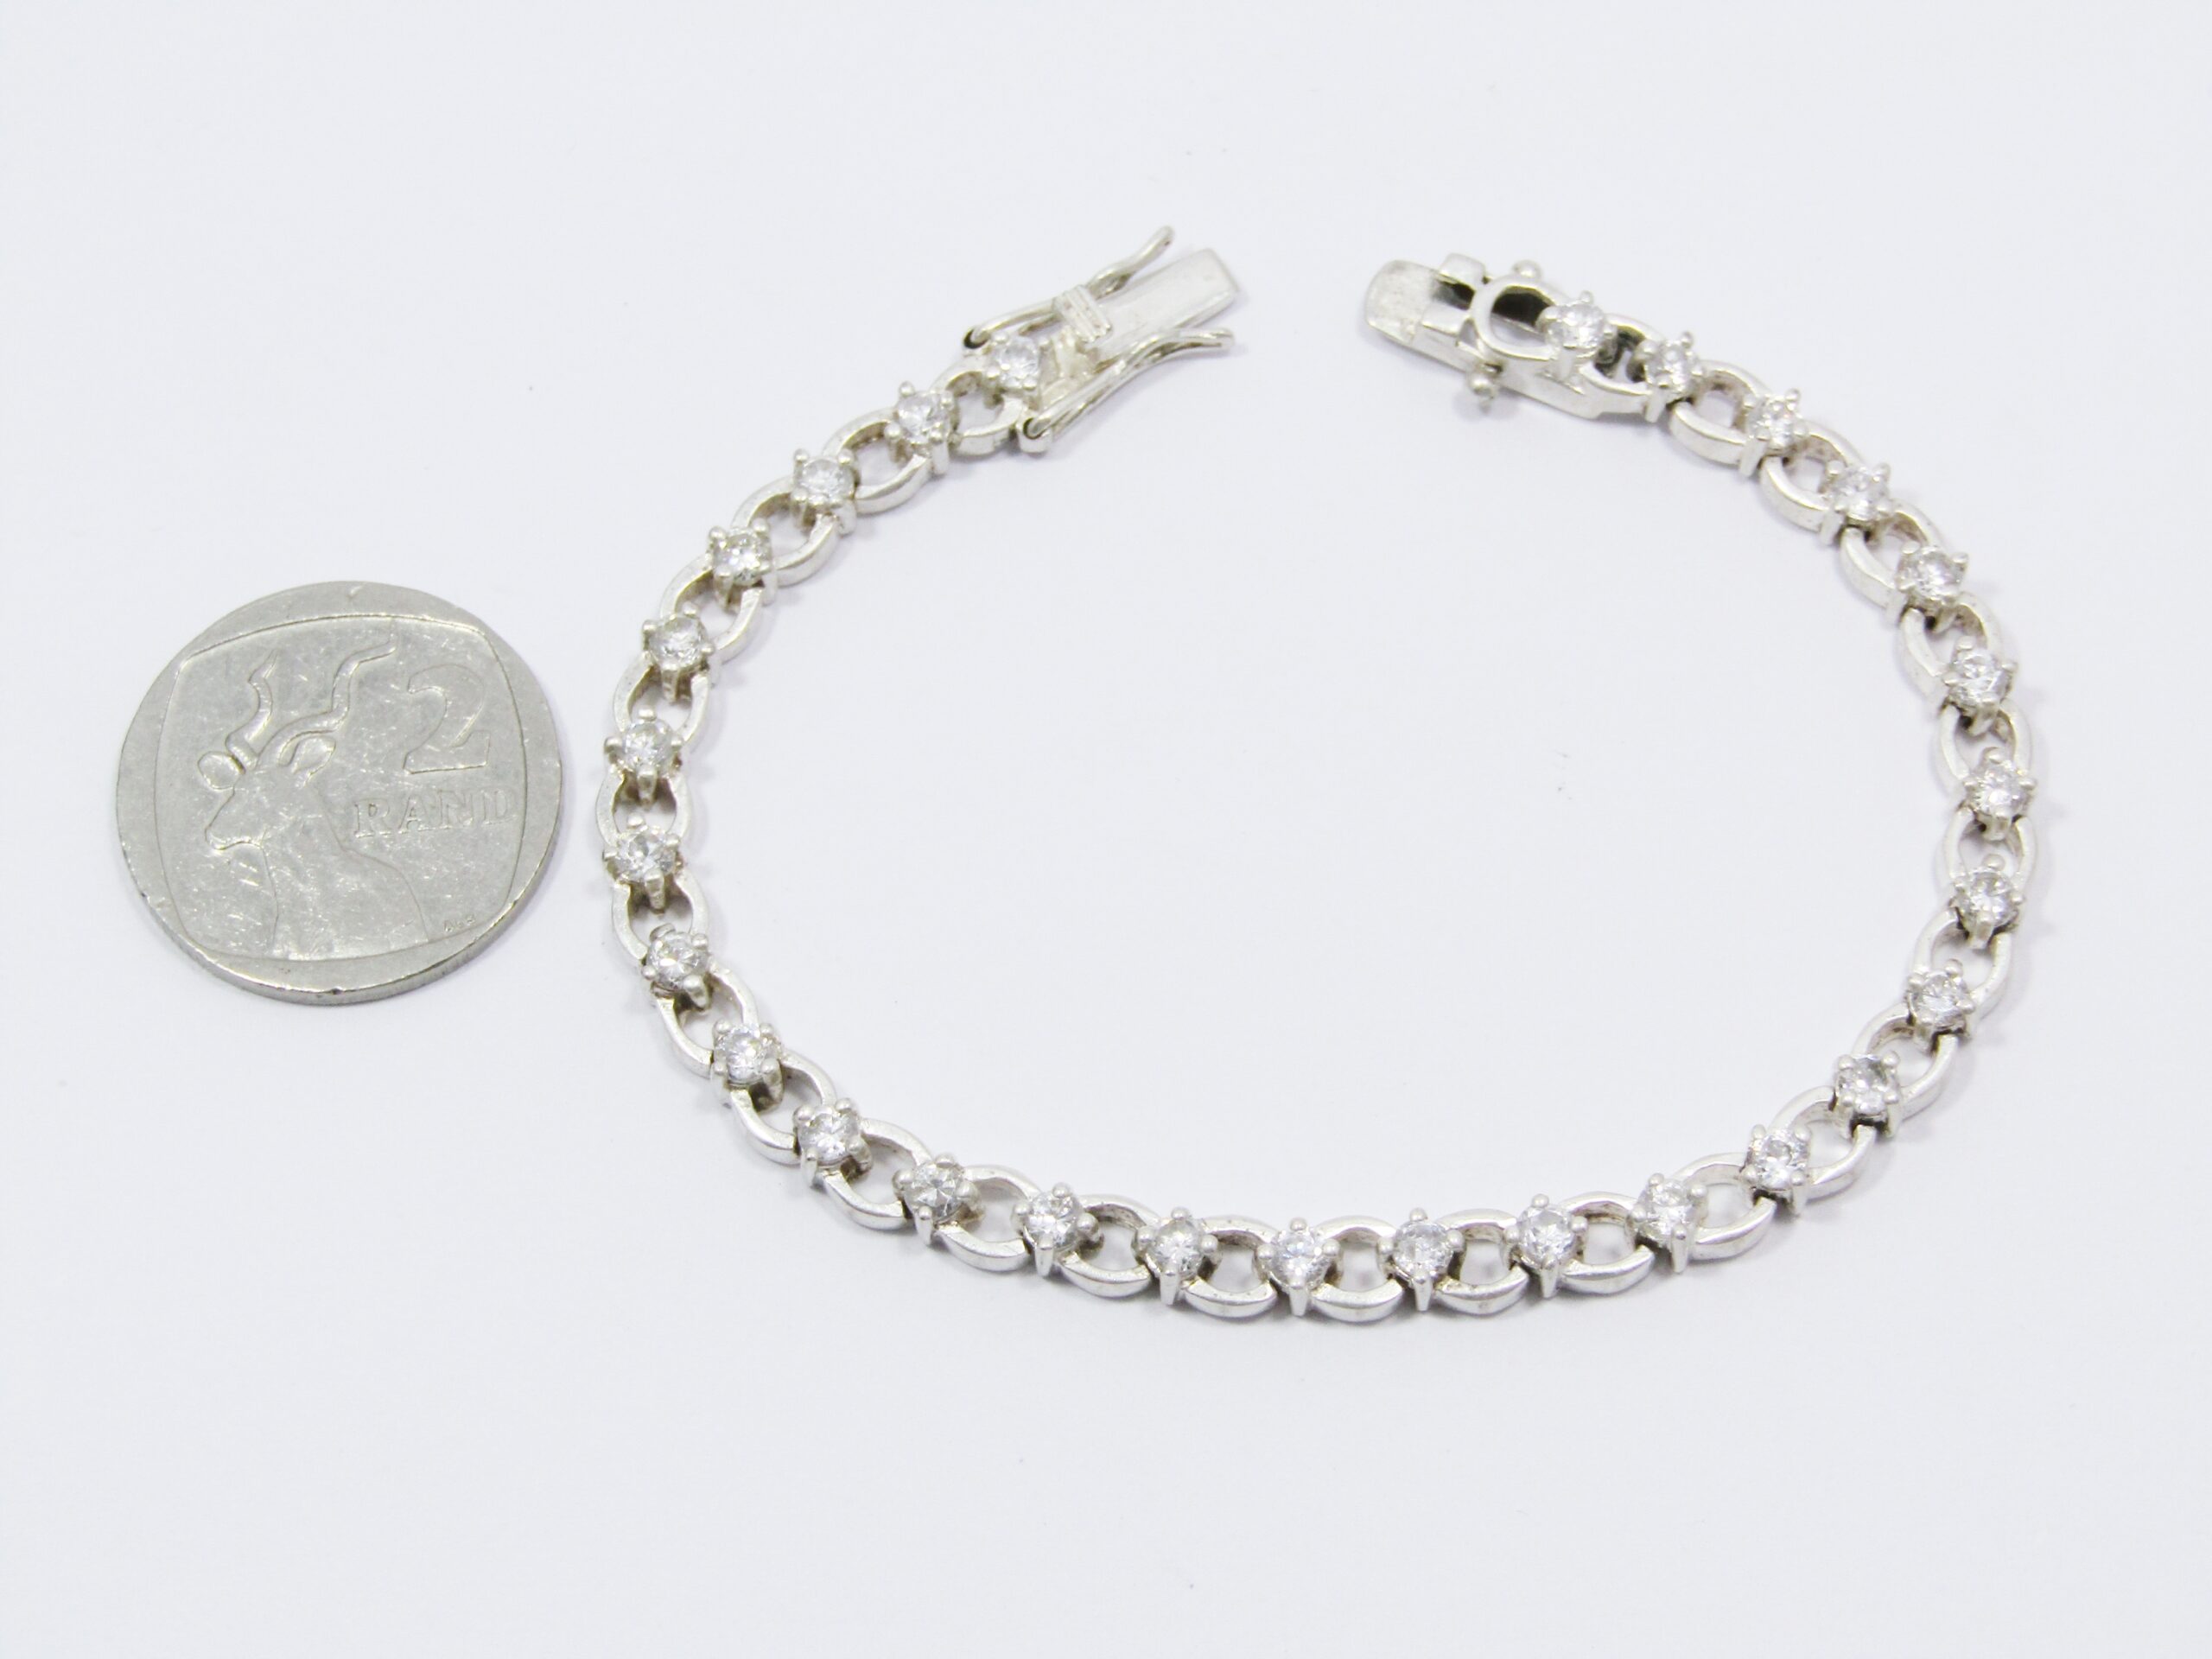 A Gorgeous Fancy Link Tennis Bracelet With Clear Zirconia’s in Sterling Silver